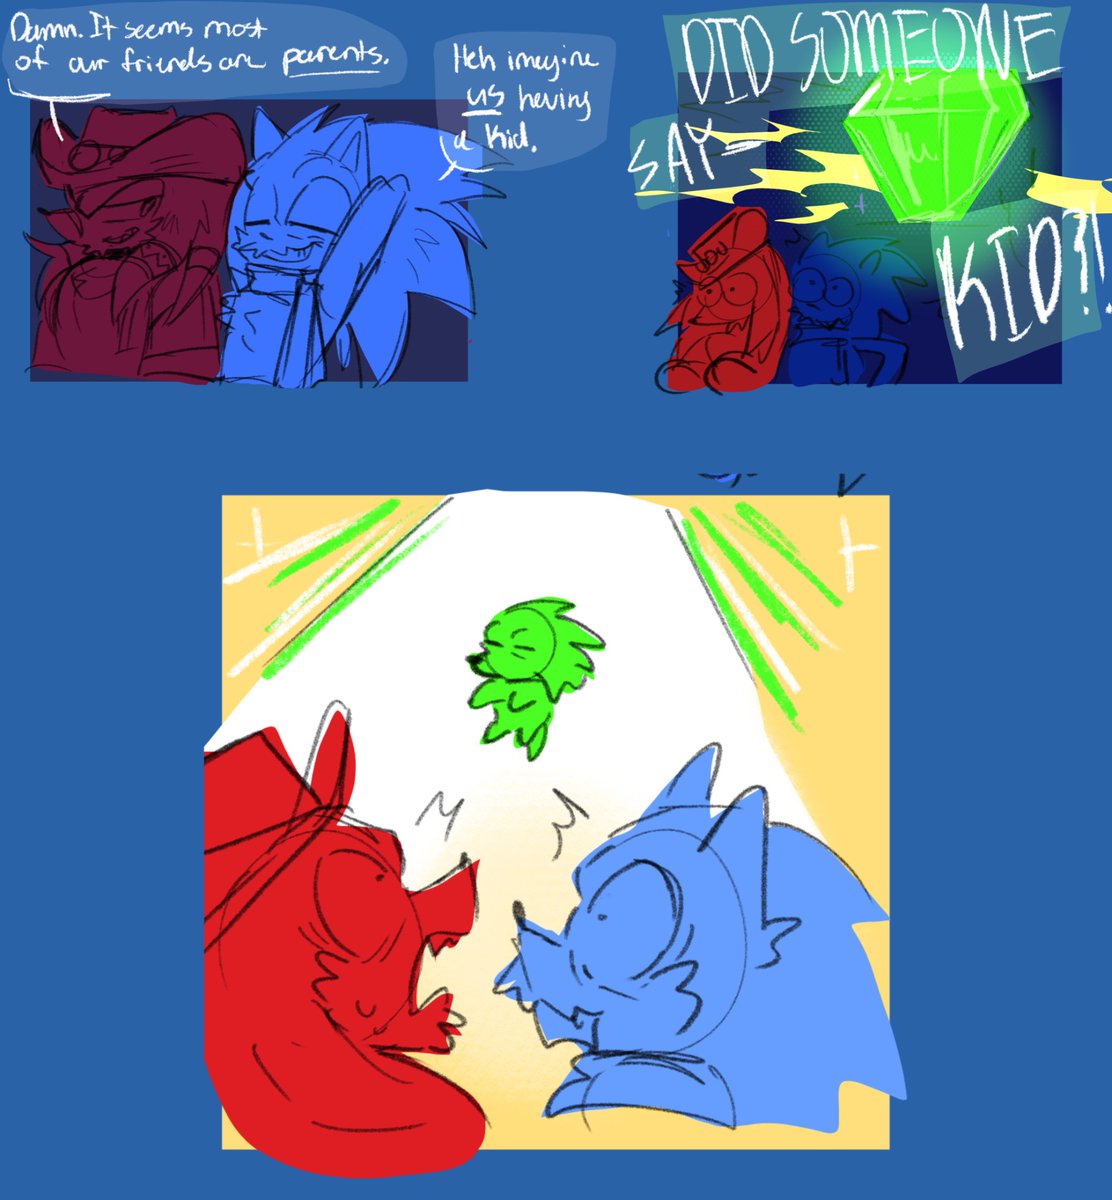 Imma just post this here…
#sonknux #SonicTheHedgehog  #KnucklesTheEchidna 
Green bean